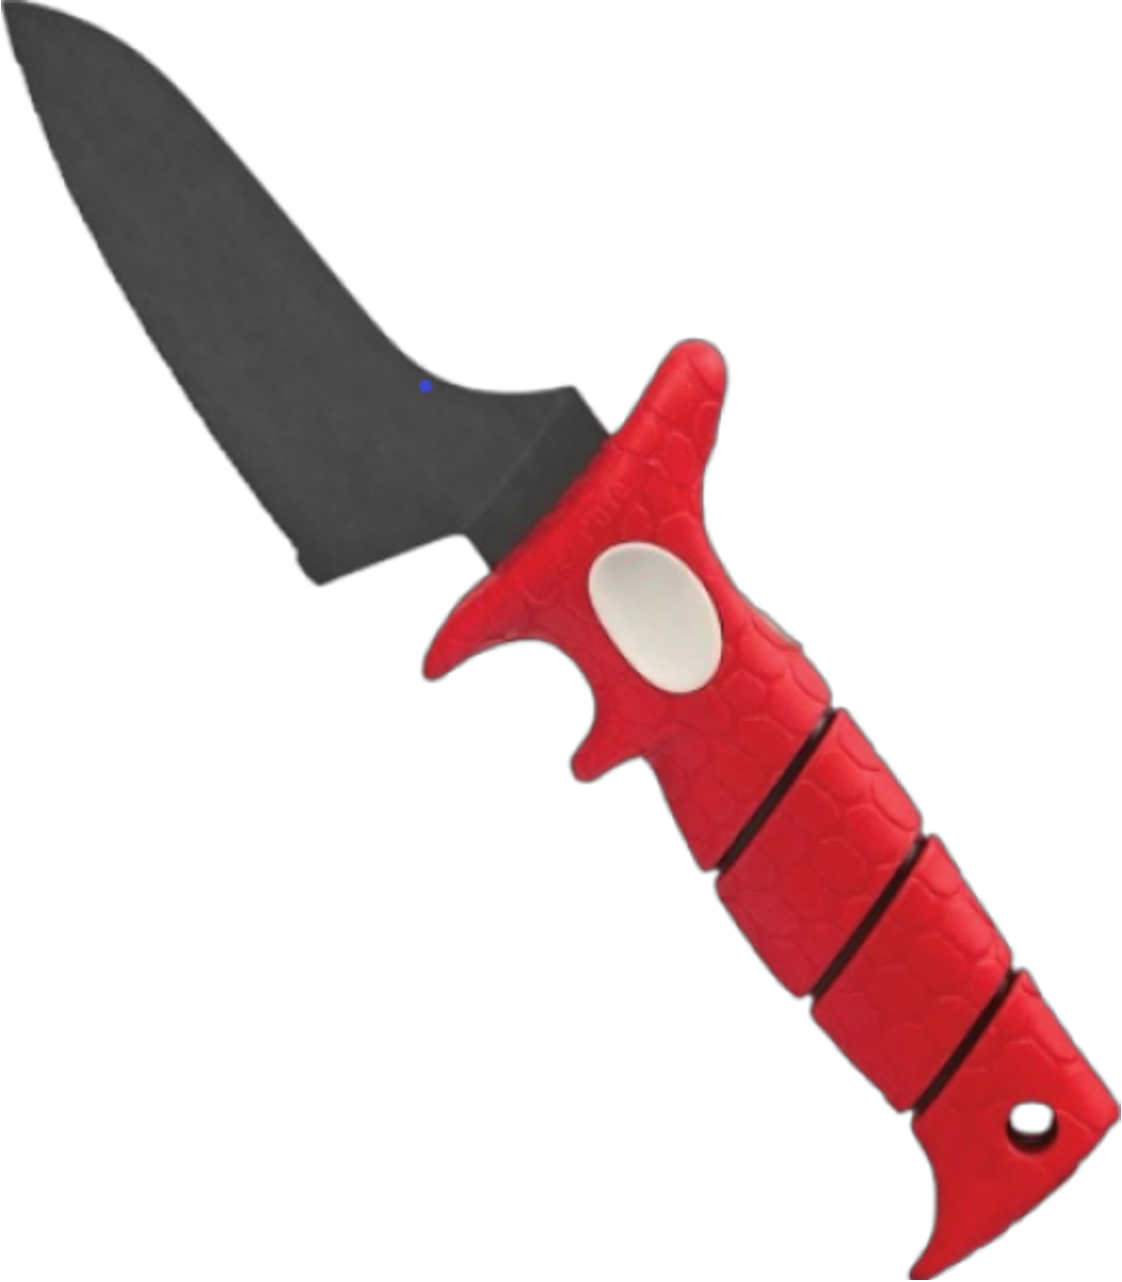 product image for Bubba Blade Shorty Red 4 HCS BUB 1 SHBP